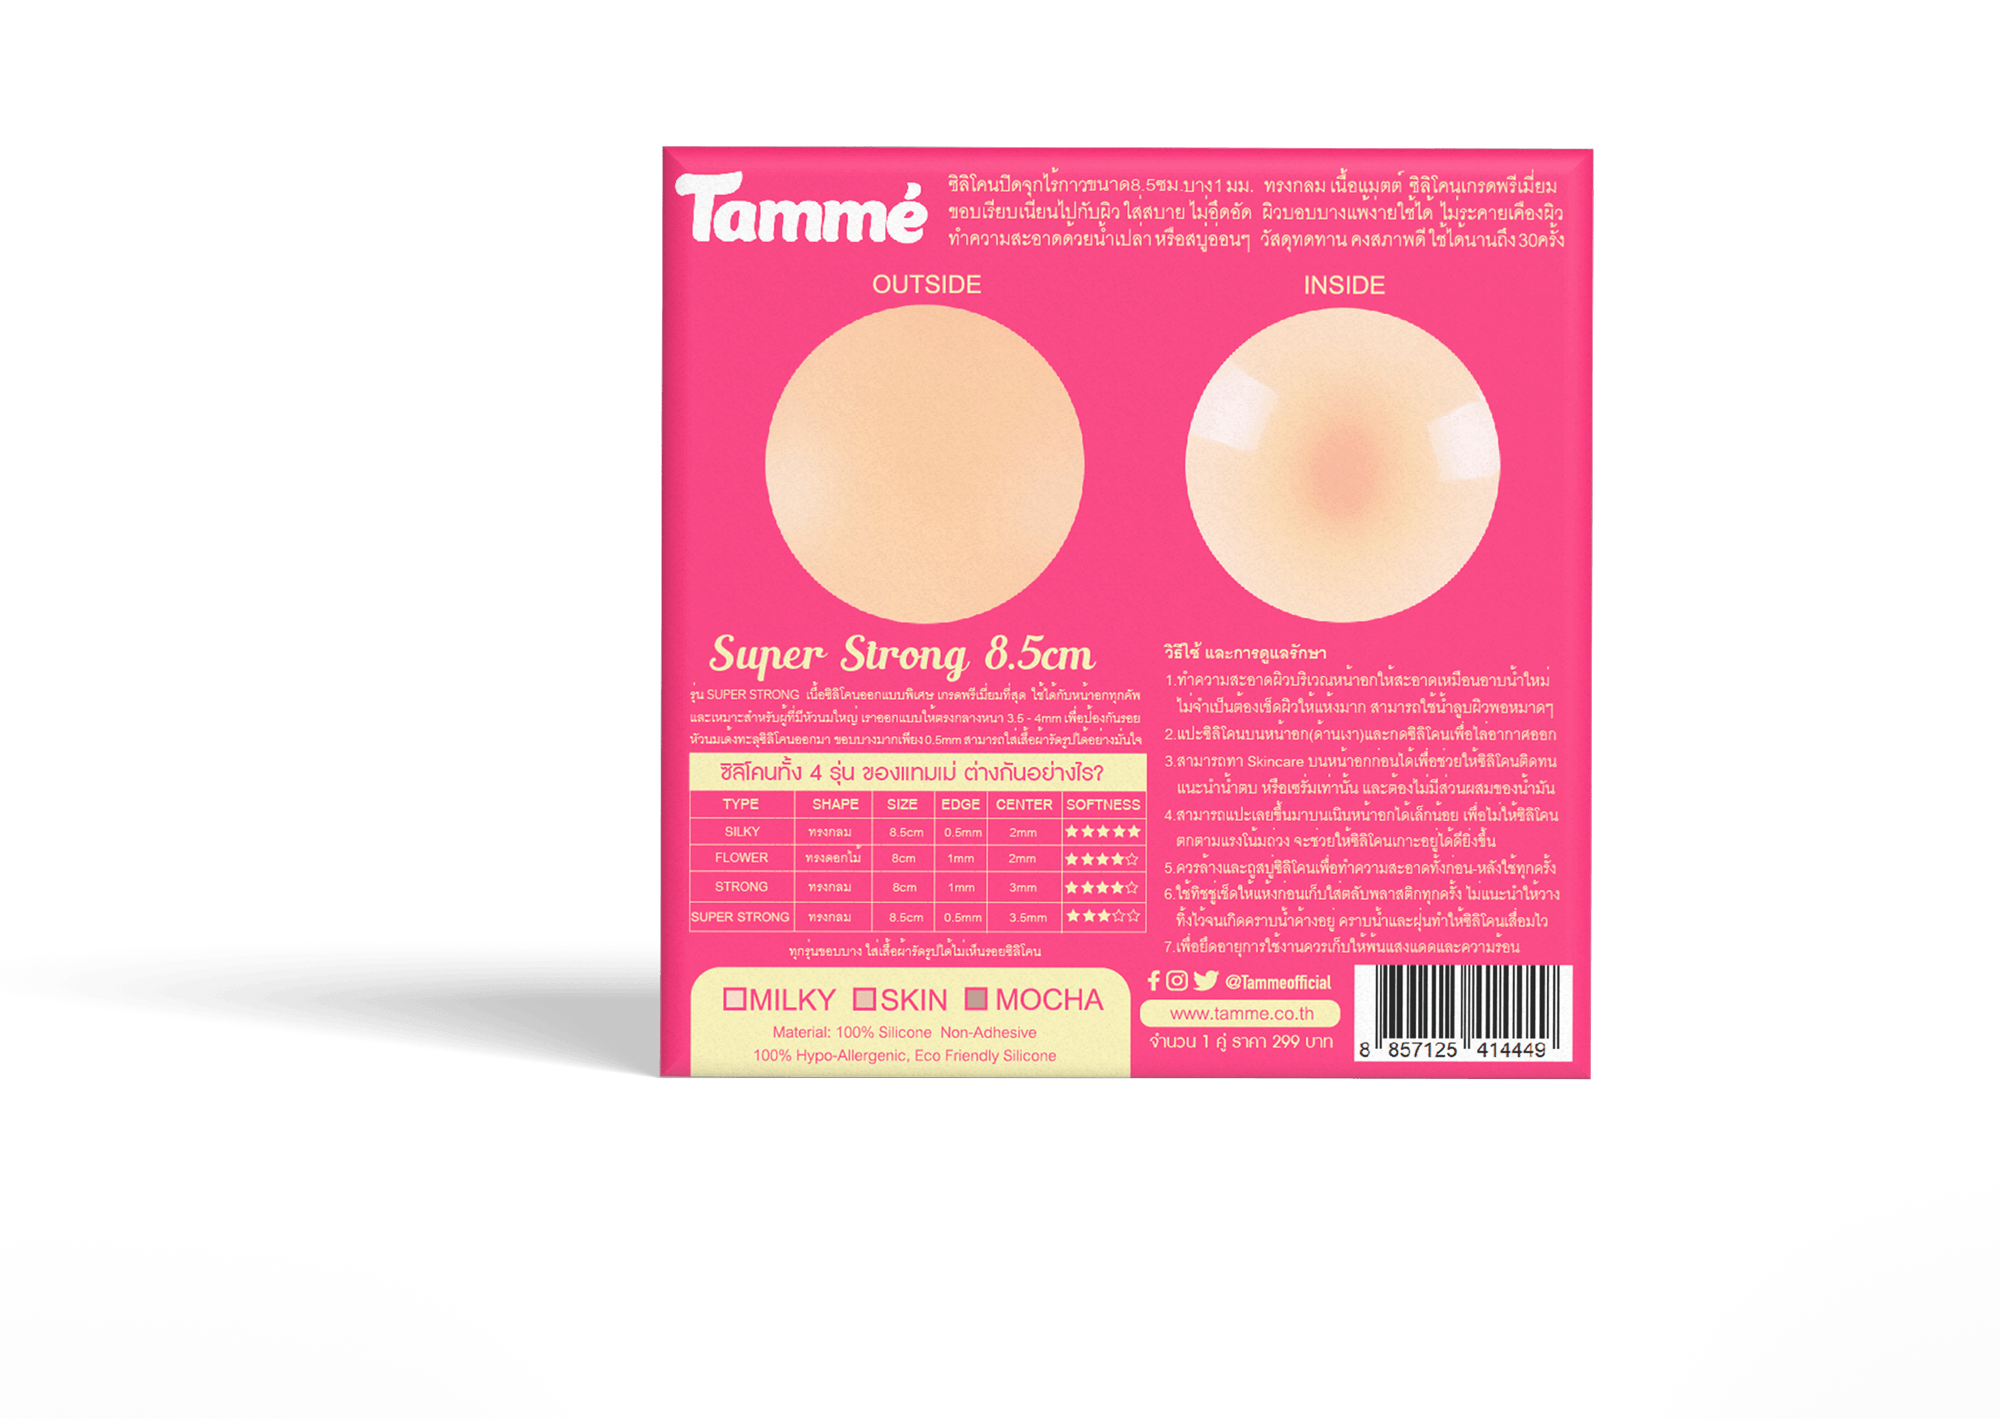 Tamme Double Sided Adhesive Padded Inserts 1.5inches thick - Cup B